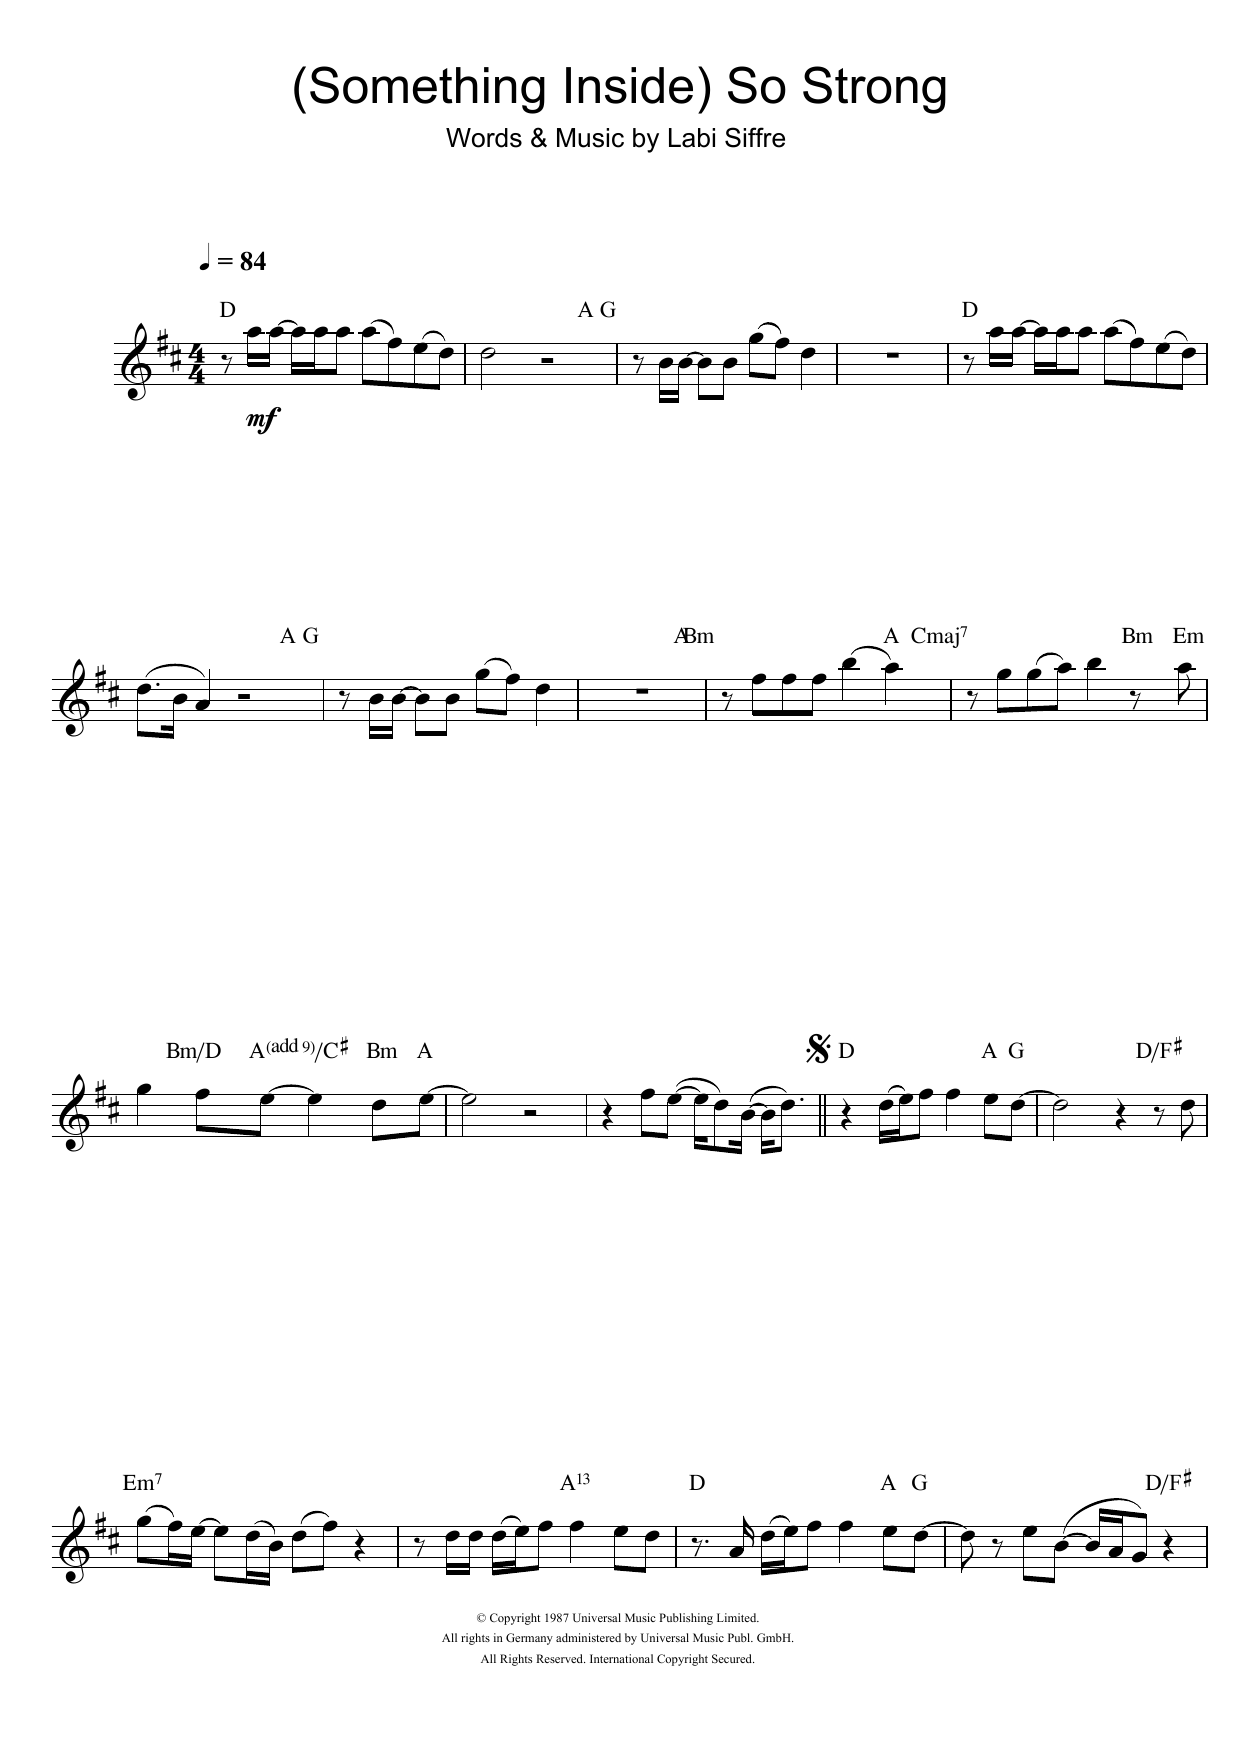 Download Labi Siffre (Something Inside) So Strong Sheet Music